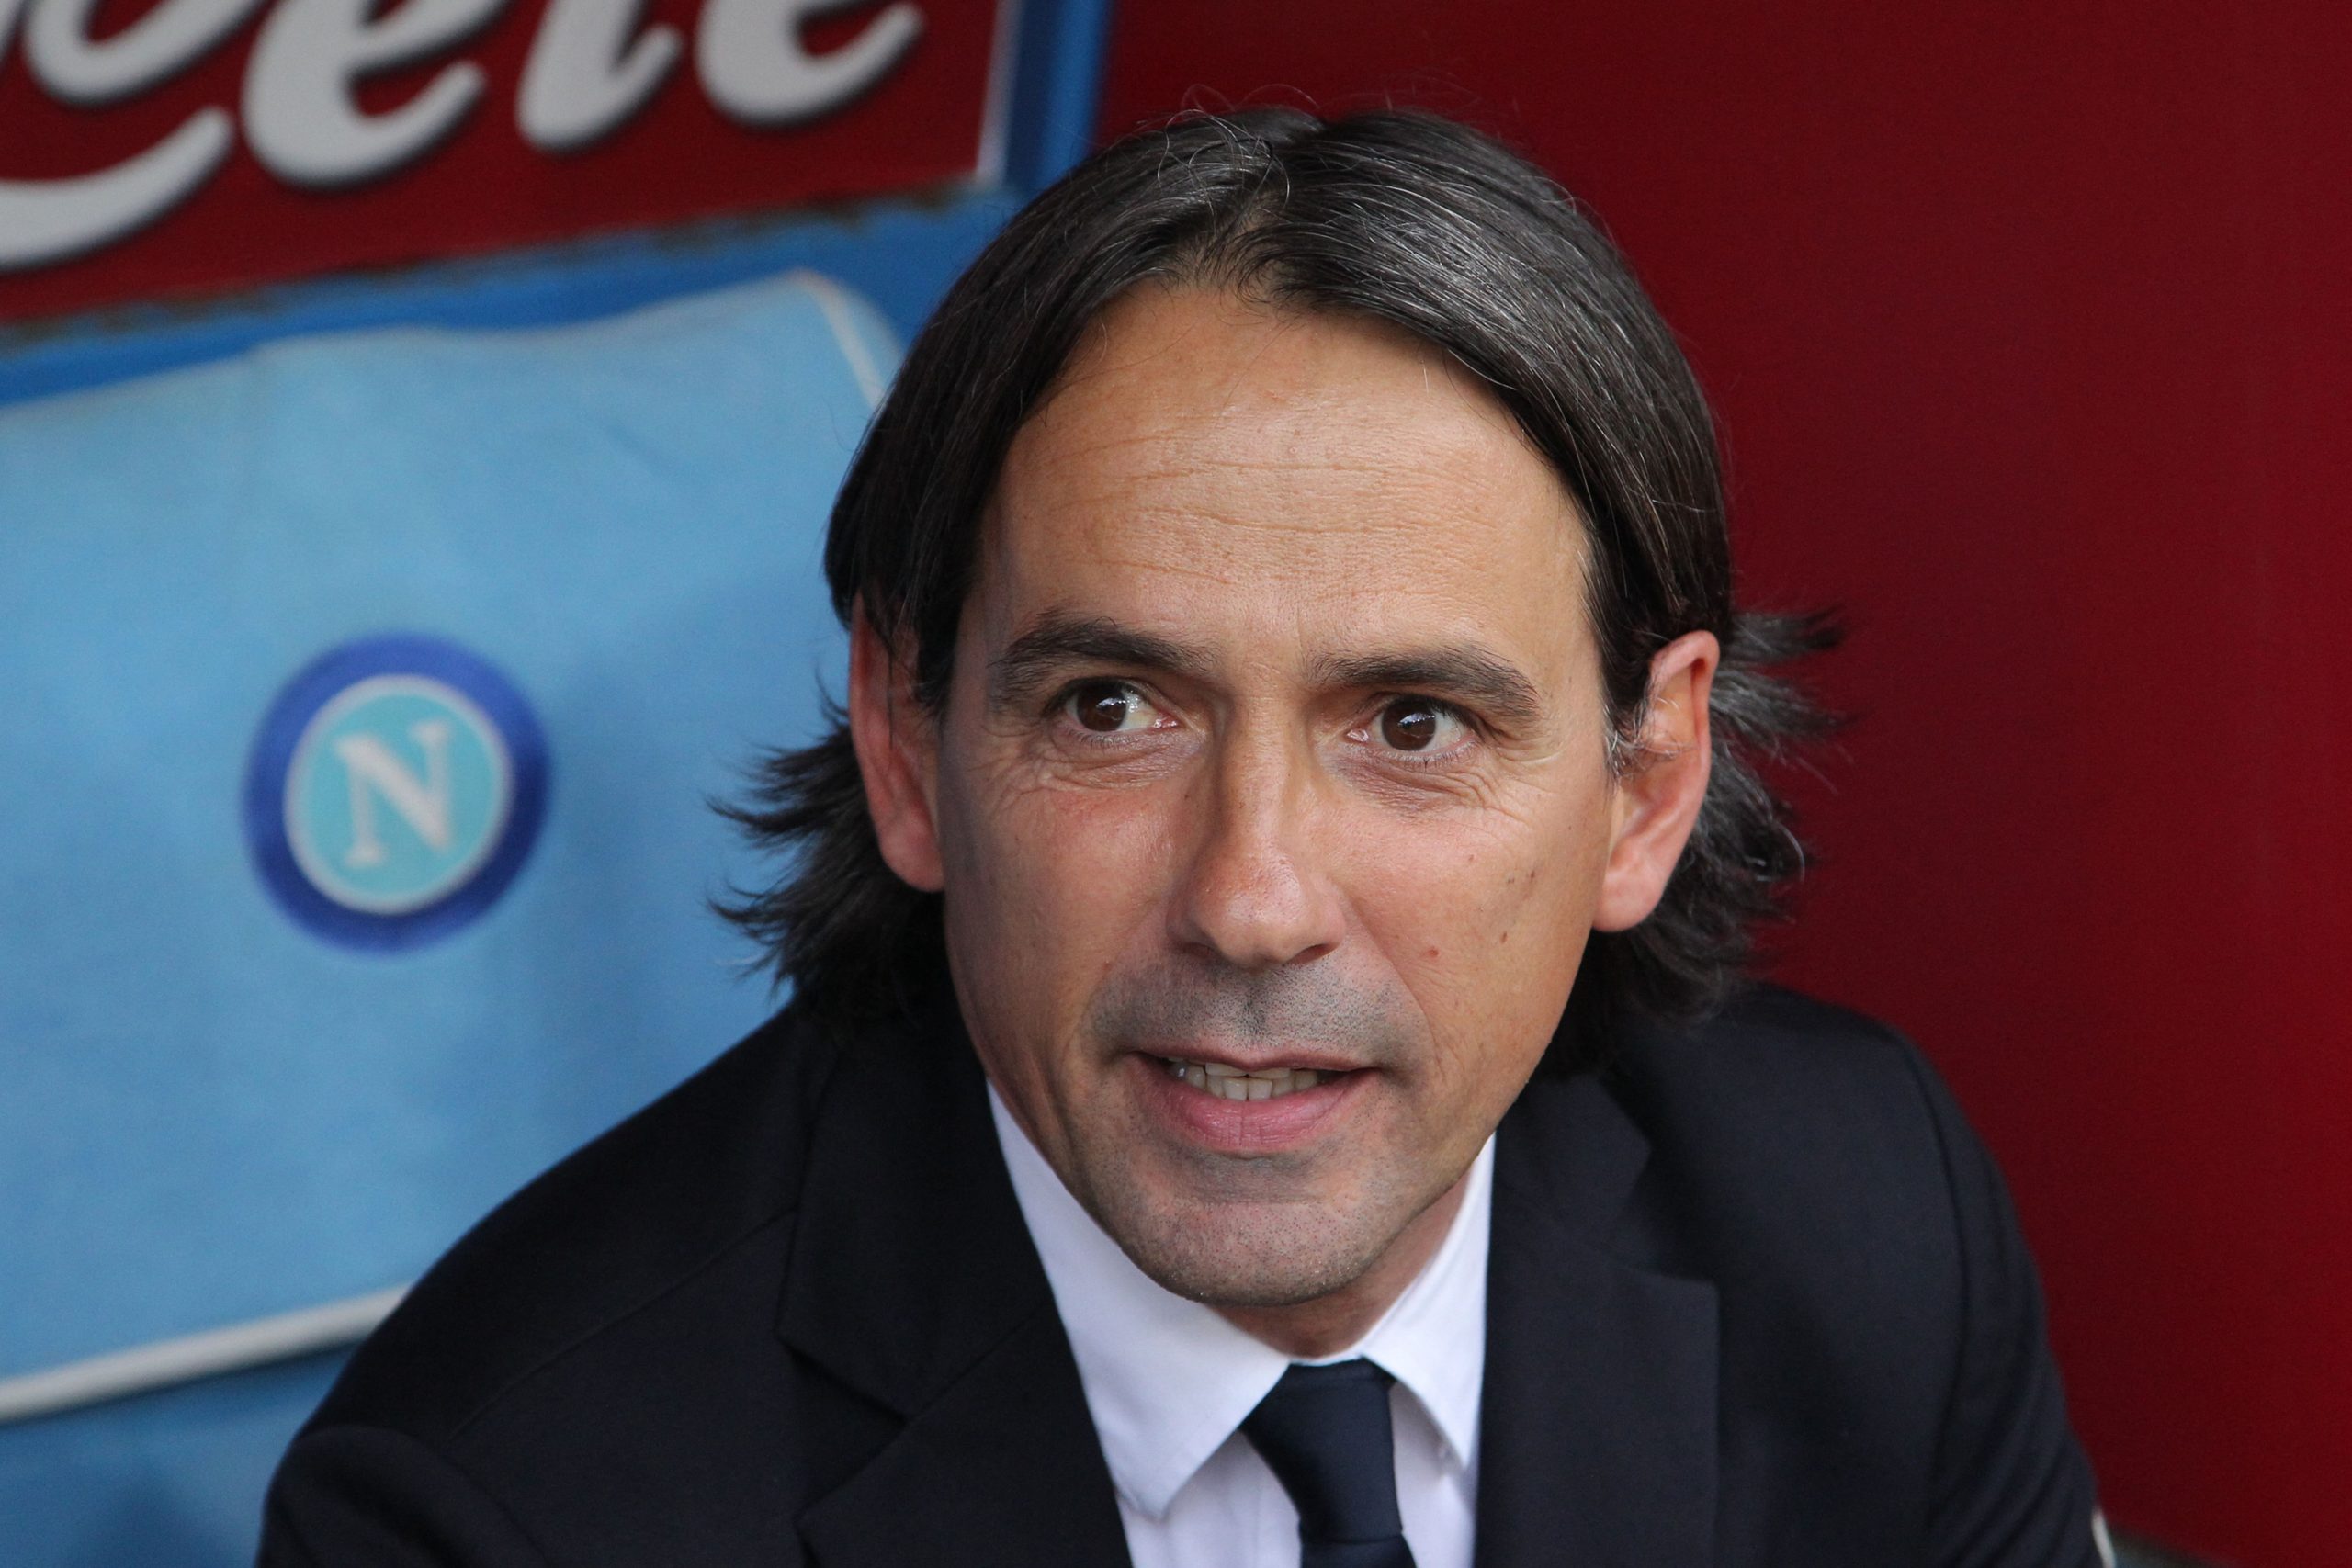 Simone Inzaghi to stay at Inter Milan amidst Tottenham Hotspur links.